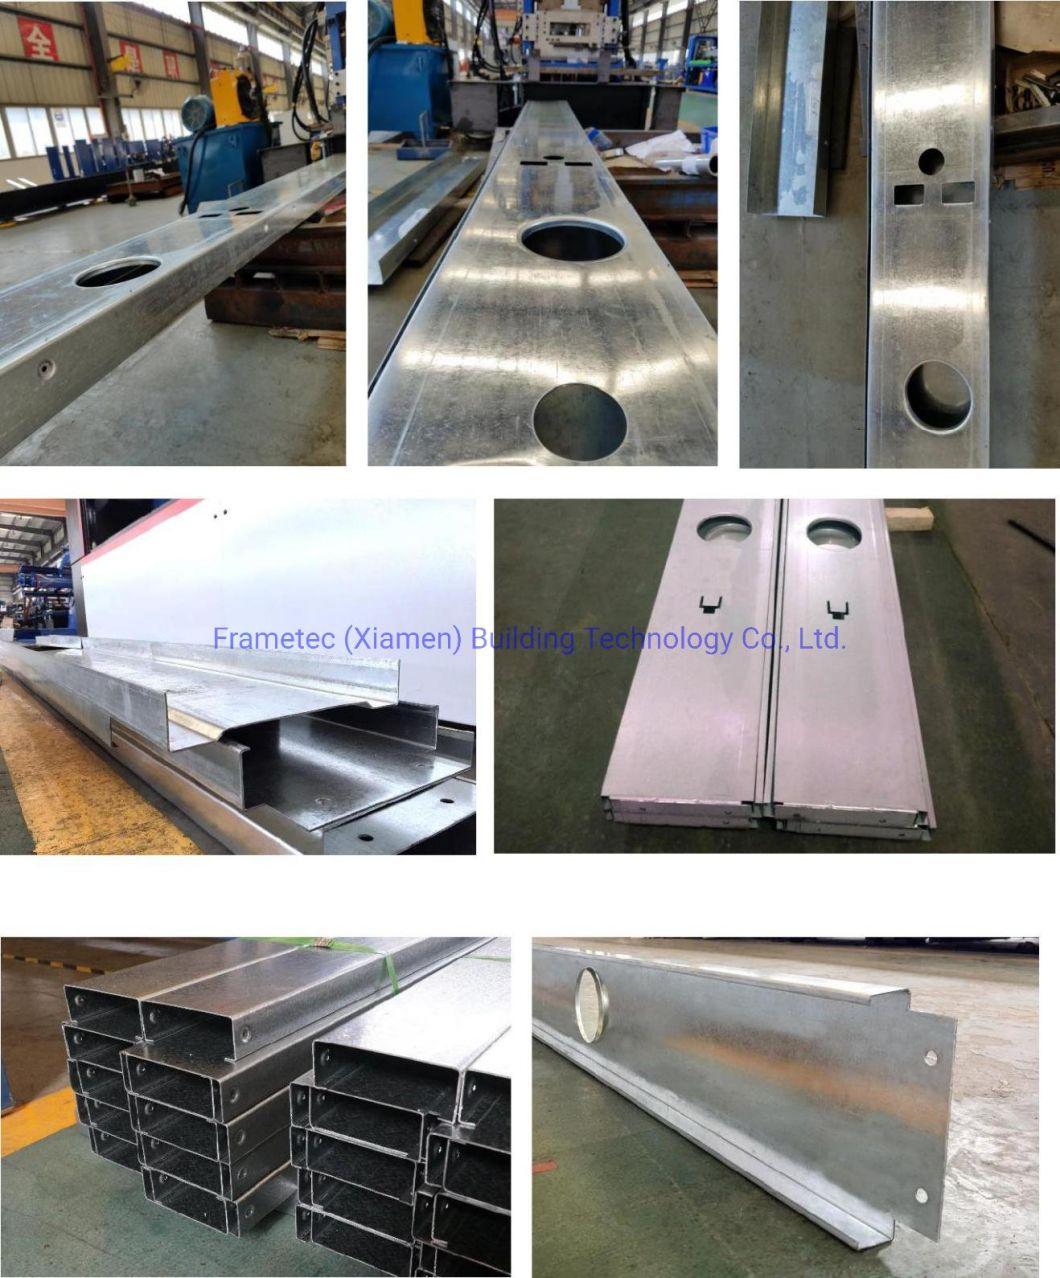 Automatic Galvanized Lgs Steel Stud and Track L Machine CNC for 1-6 Stories House Building Factory Price